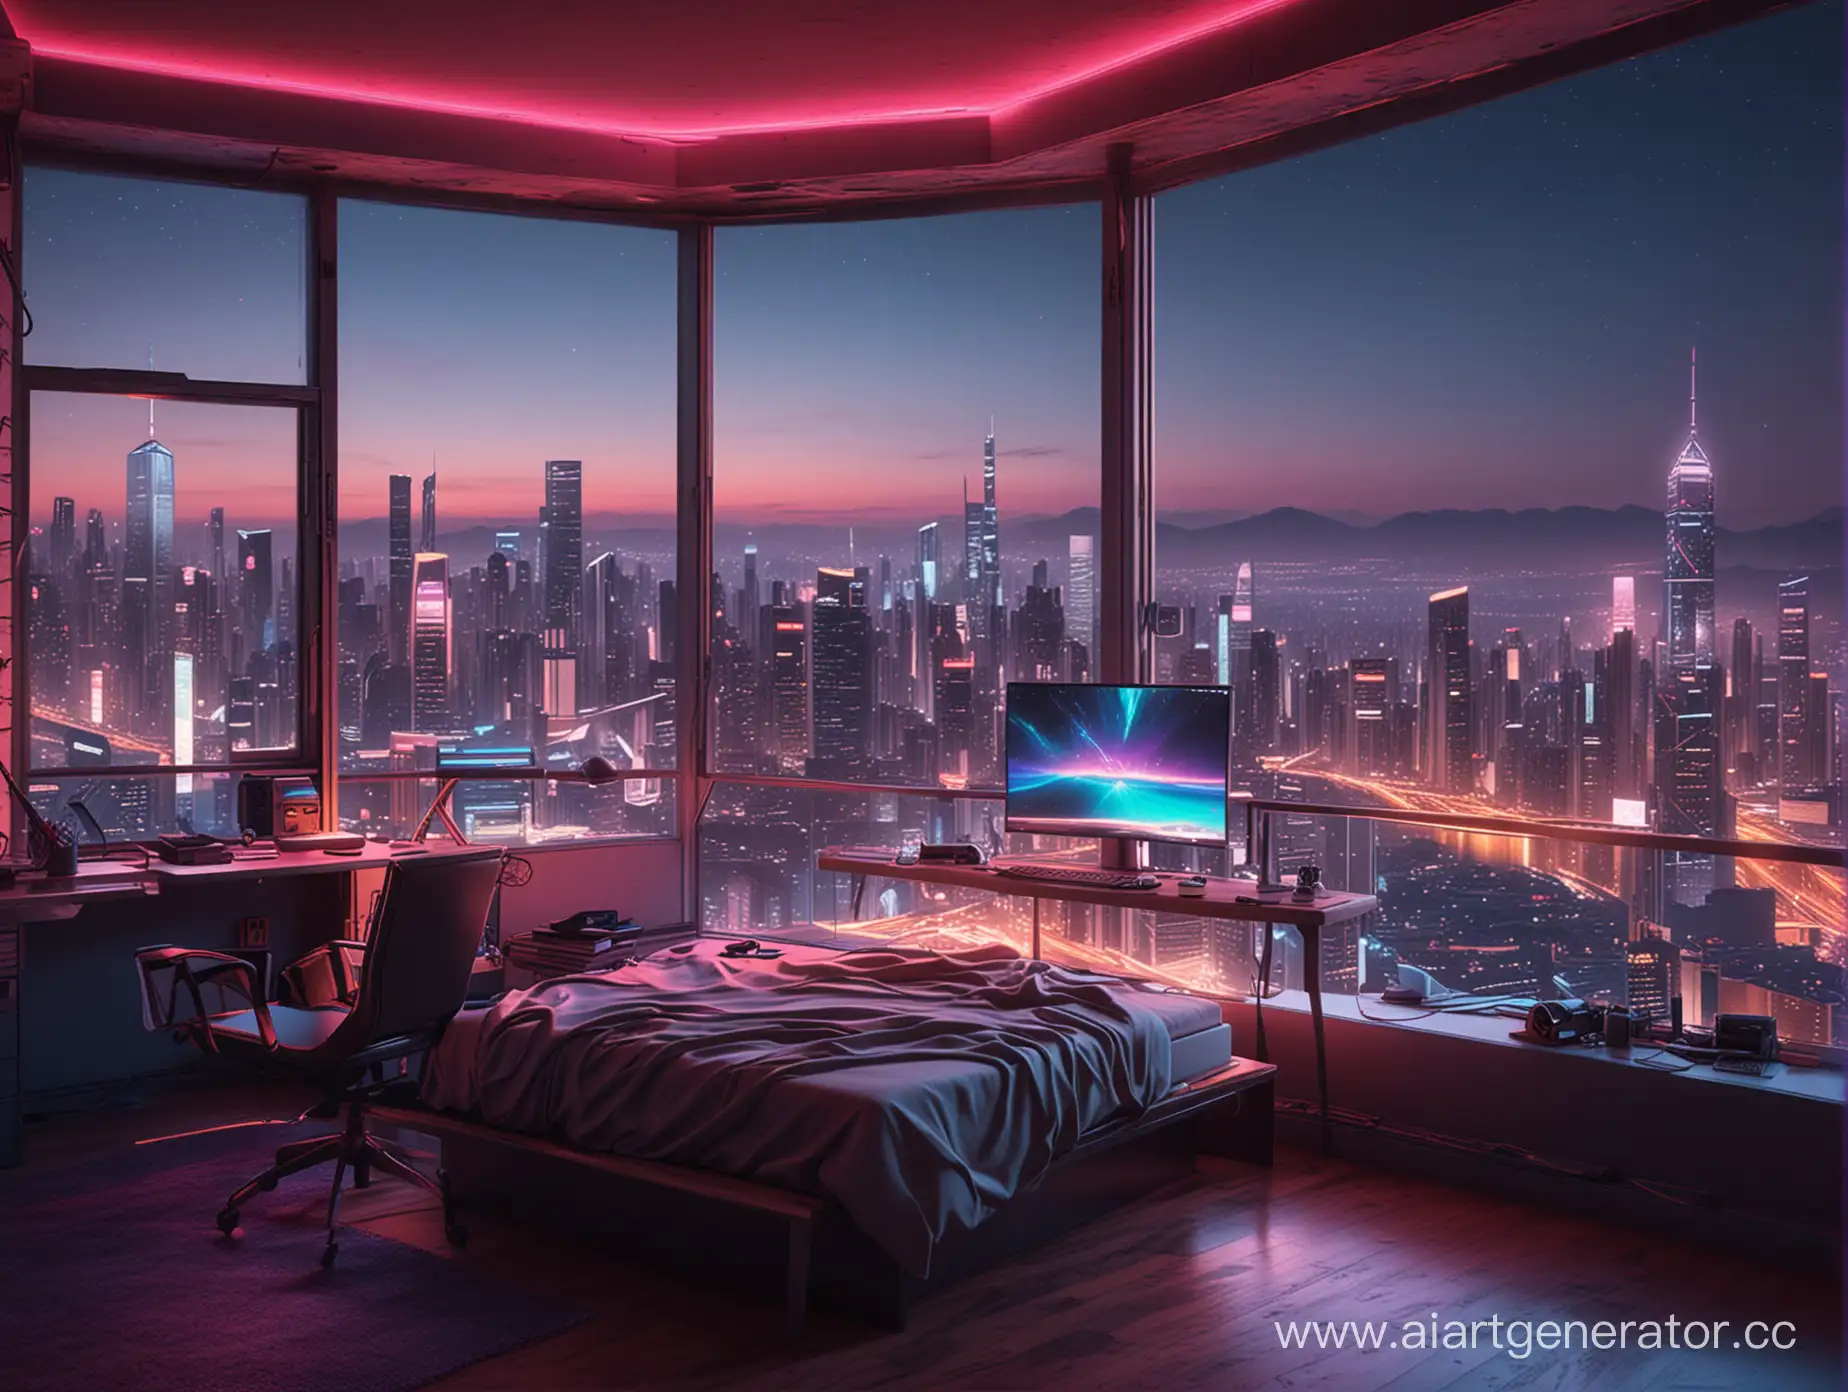 Futuristic-Cyberpunk-Bedroom-with-Neon-Accents-and-Cityscape-View